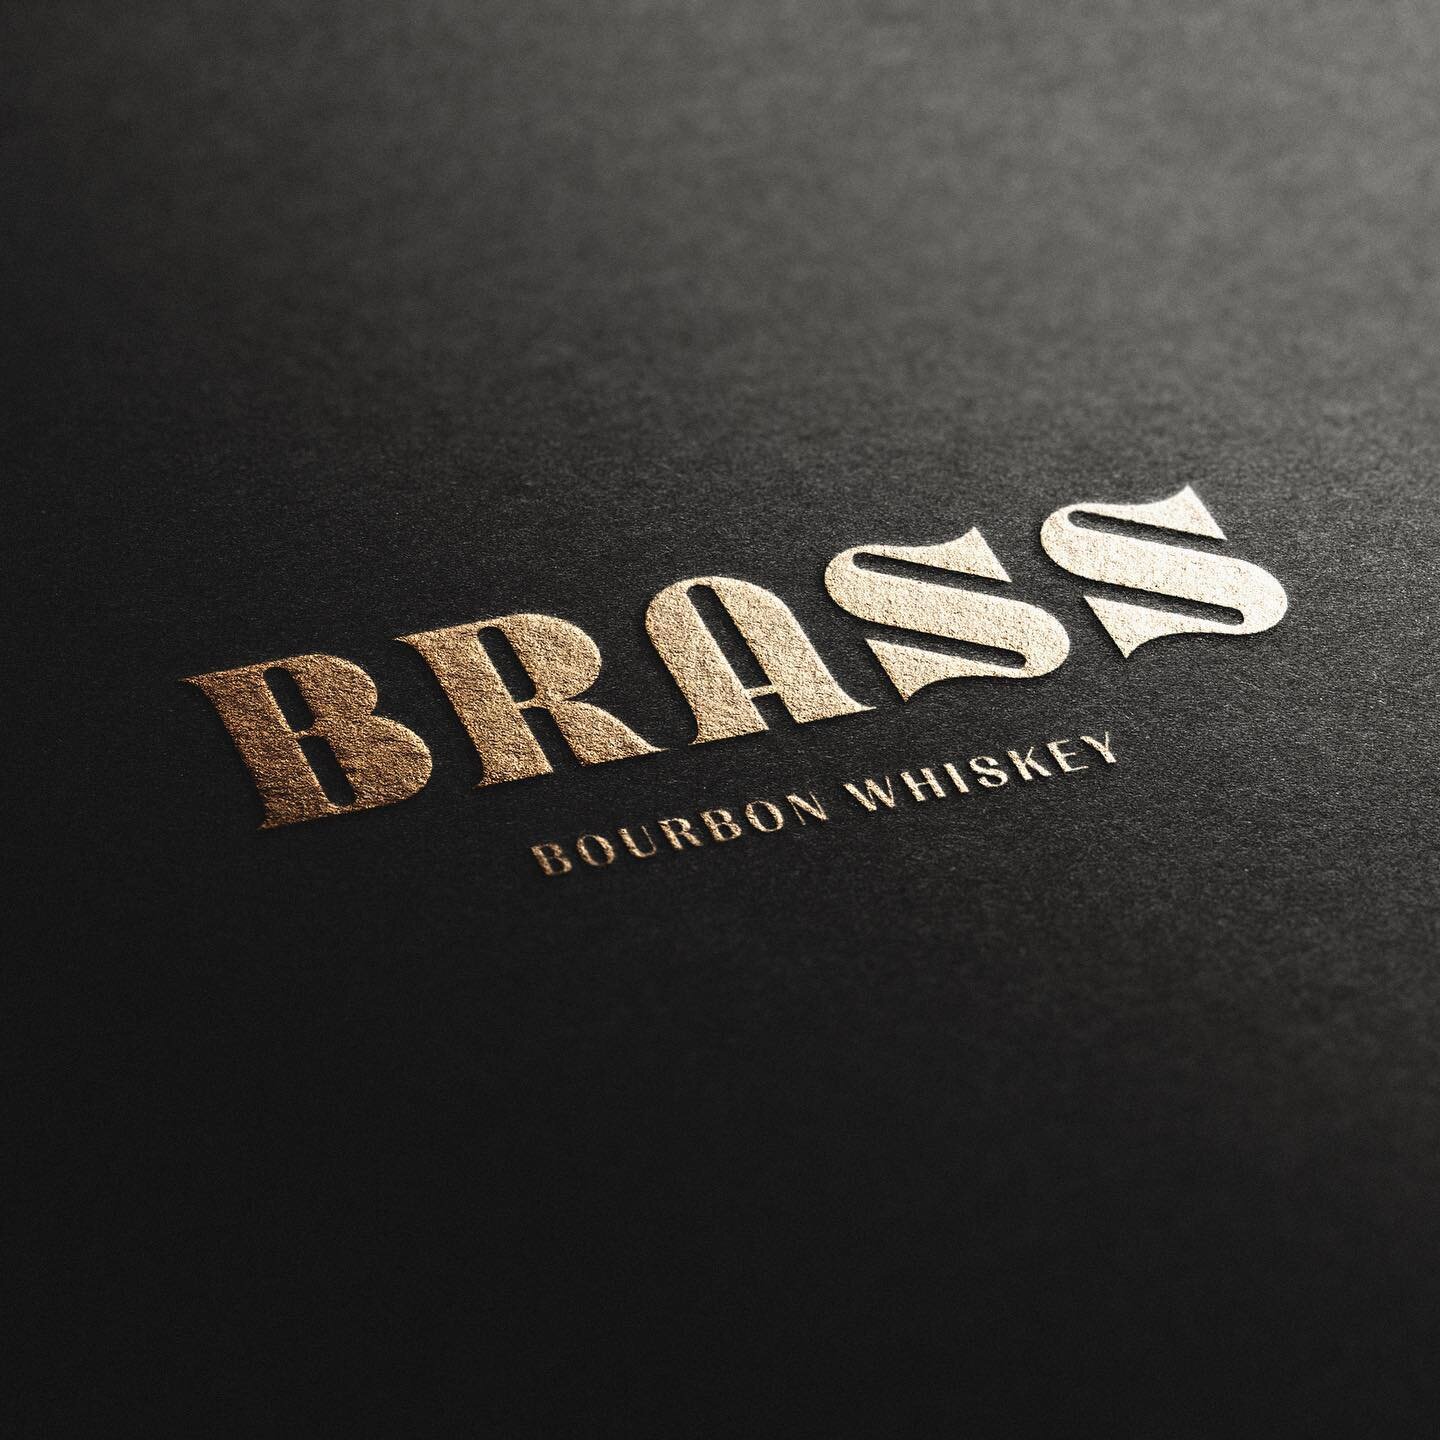 Close up of the Brass Bourbon logo design. We really got to geek out on type with this mark 🤓. We were inspired by the shape language and boldness of brass instruments 🎺, so we crafted the custom typography to embody that aesthetic. The logo became